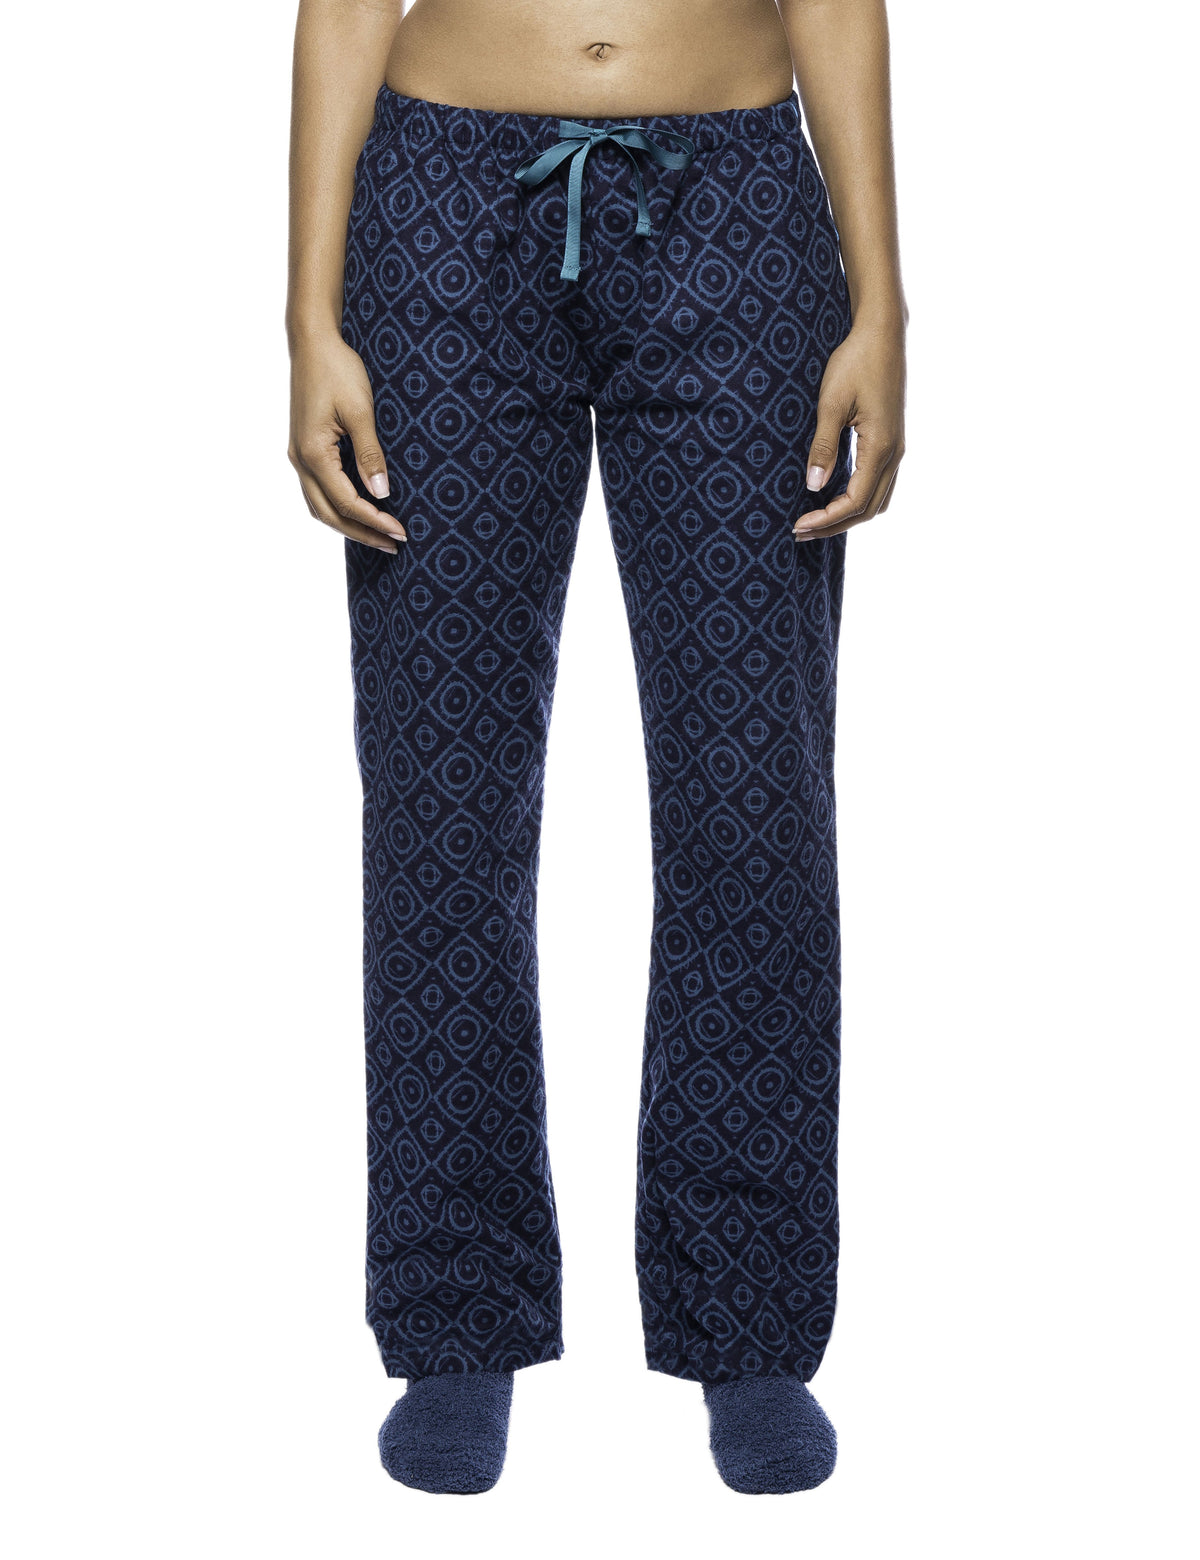 Womens Premium 100% Cotton Flannel Lounge Pants - Moroccan Navy/Teal